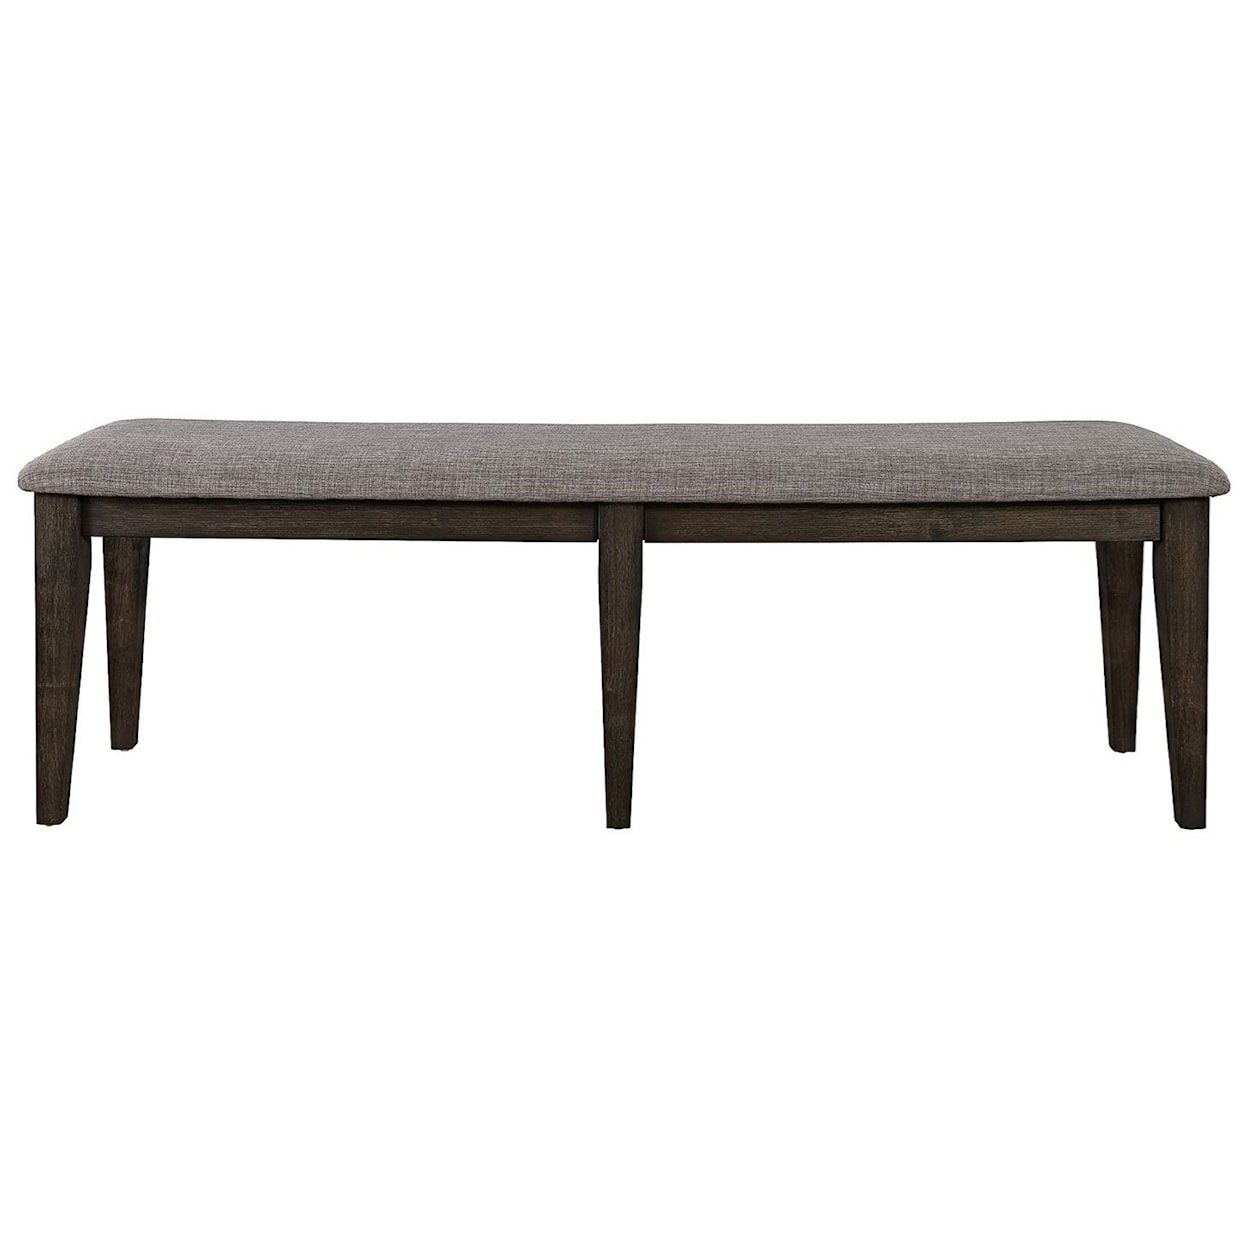 Libby Double Bridge Upholstered Dining Bench